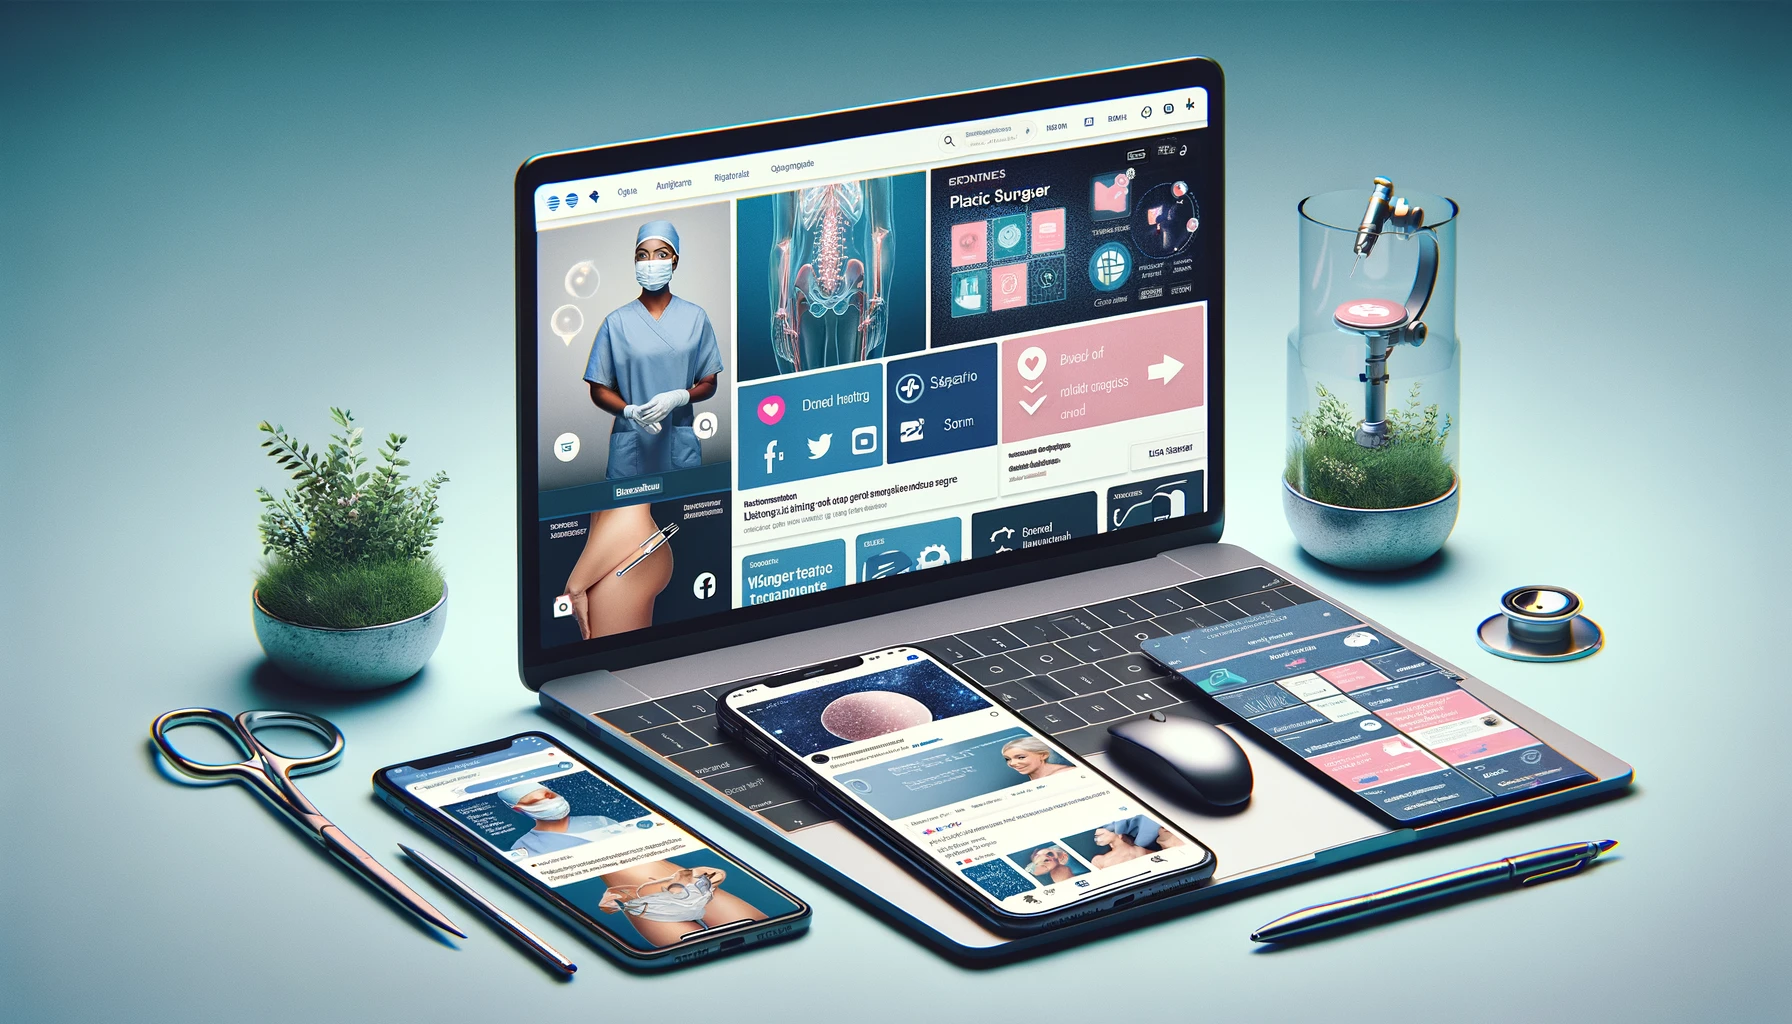 Split-screen showing a mobile phone with a plastic surgeon's website and a laptop with a social media feed, plus a collage of digital advertising elements.